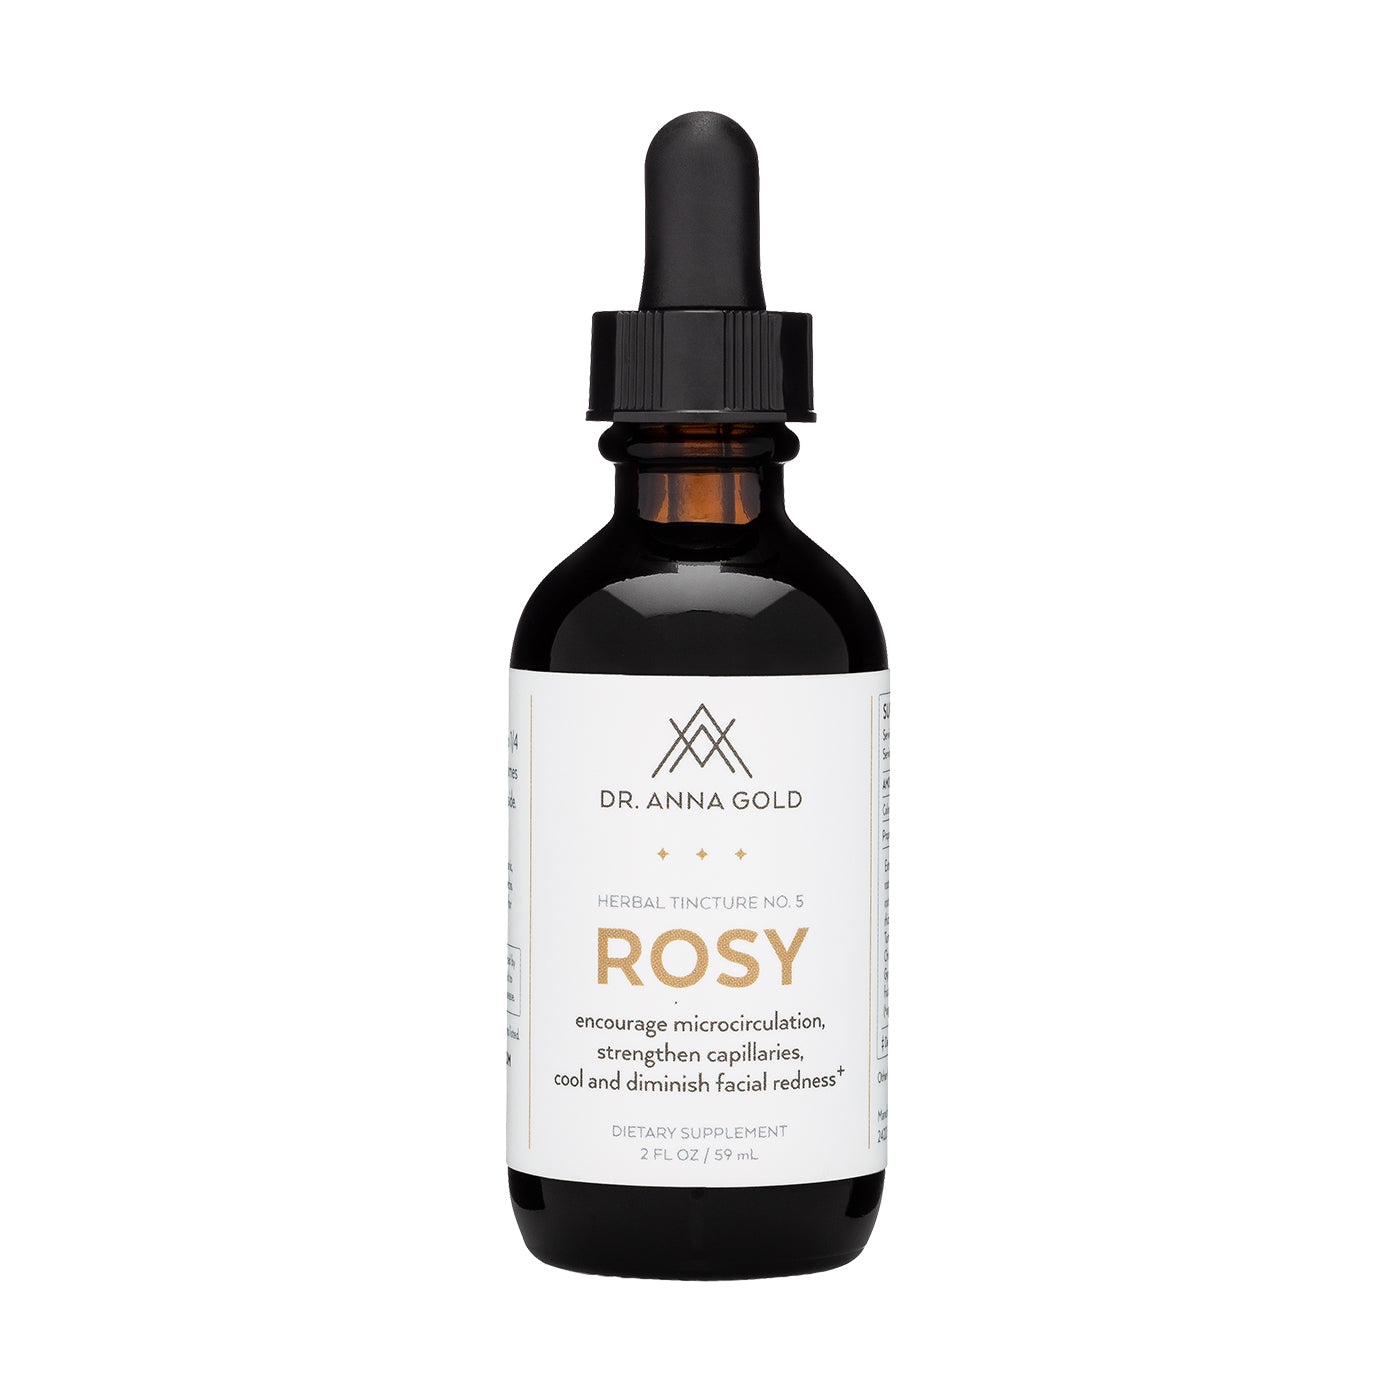 Dr. Anna Gold ROSY Tincture